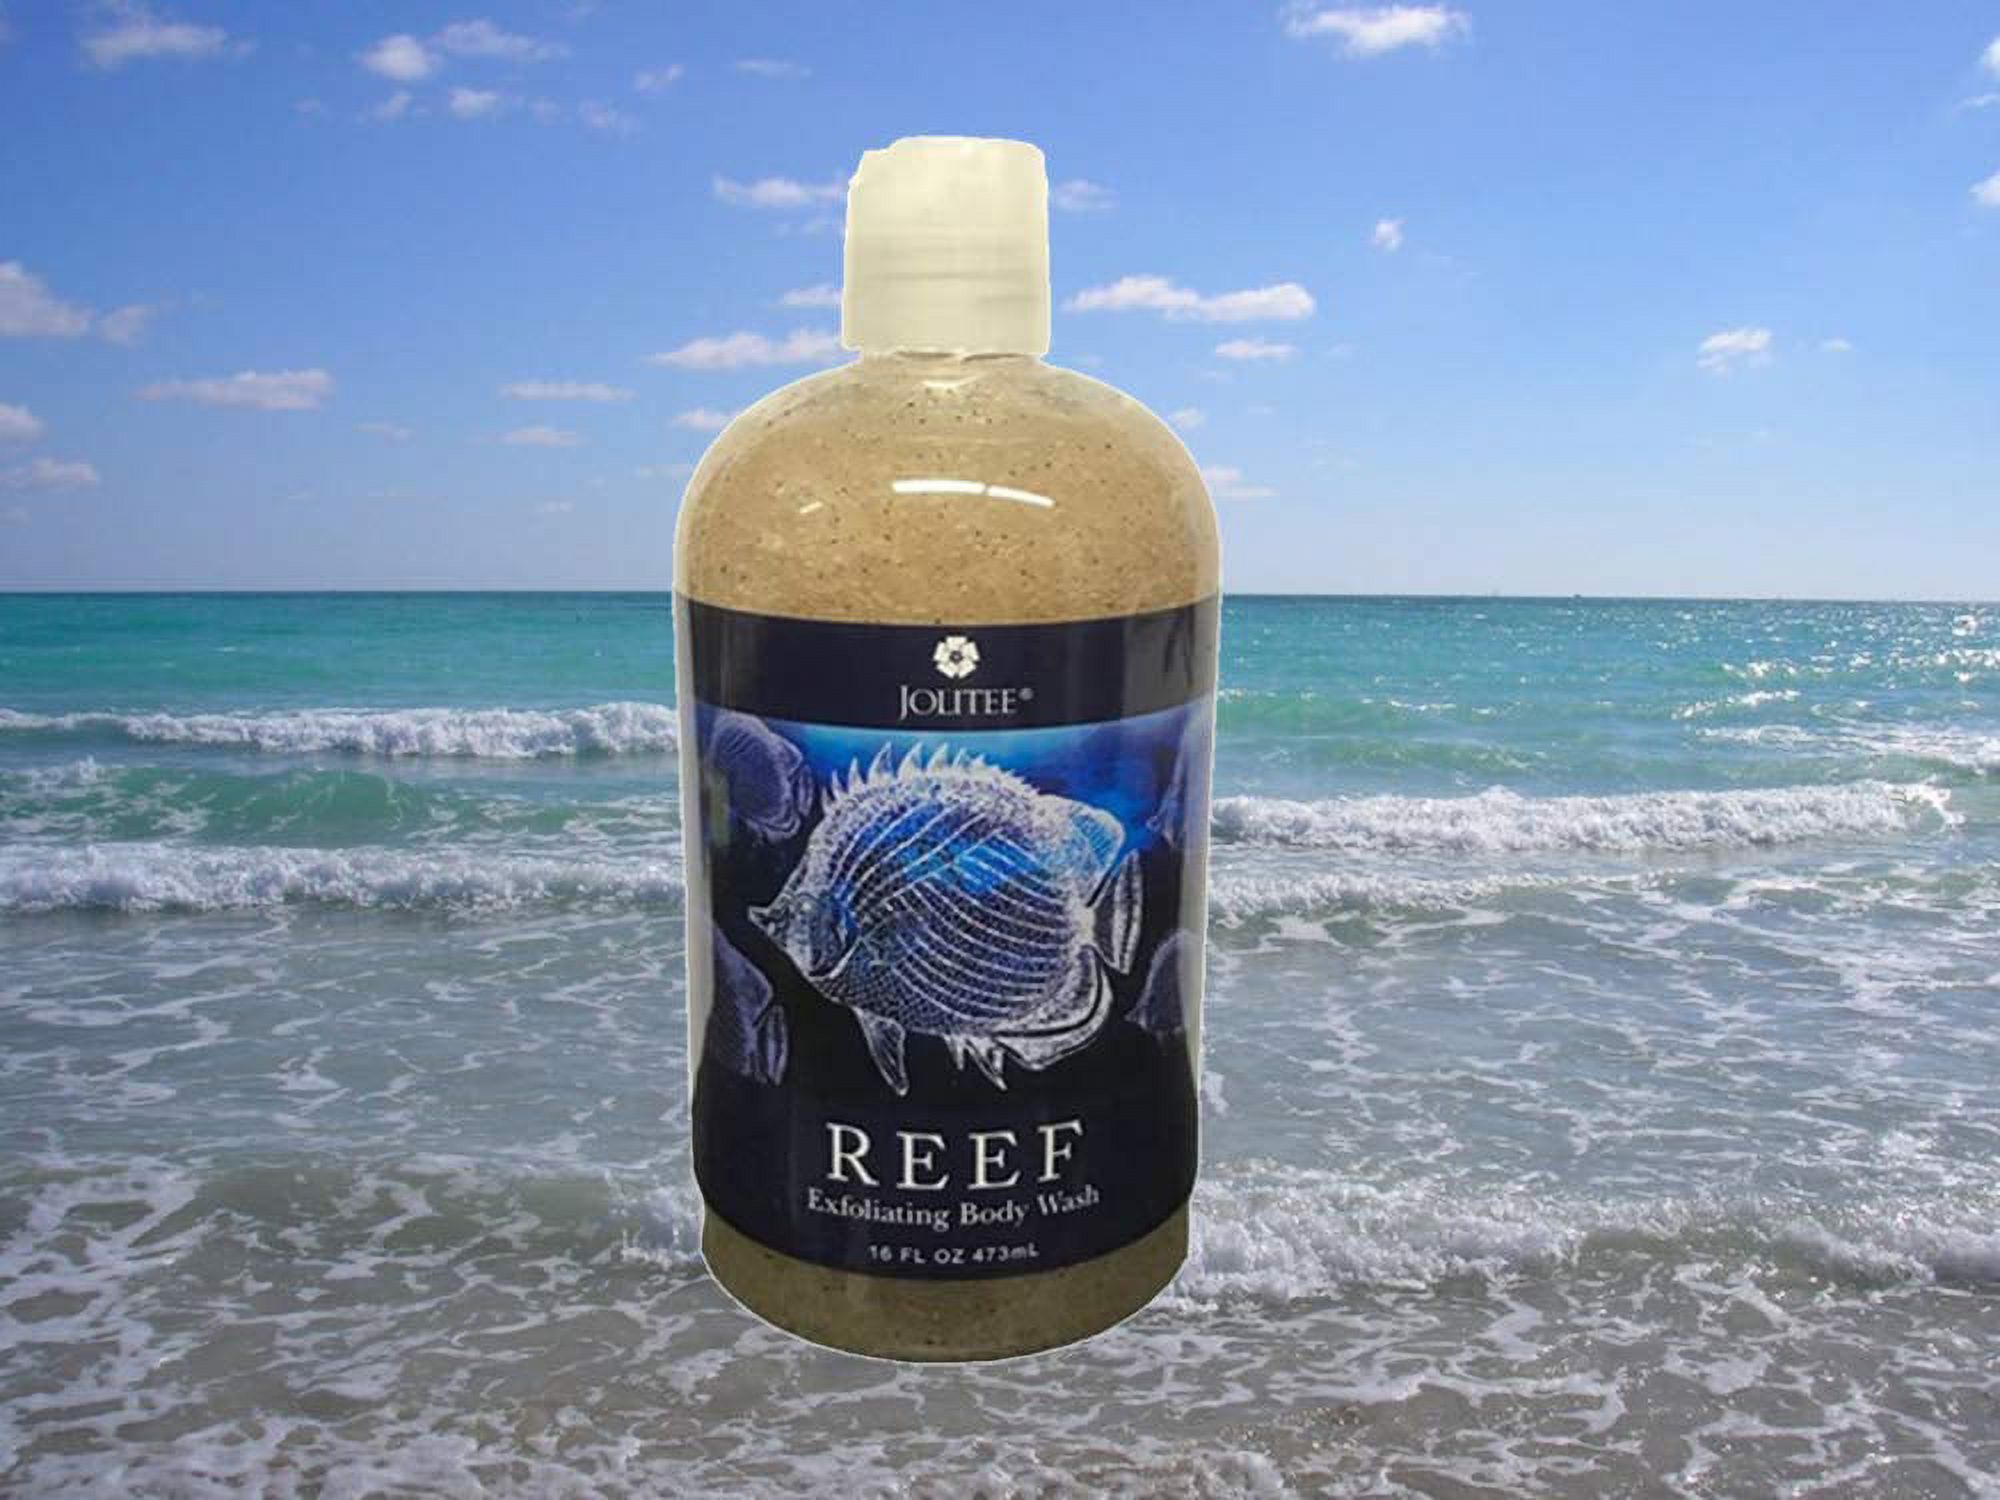 Reef Luxury Shea and Cocoa Butter with Sea Kelp Extract (Body Wash) - image 2 of 3